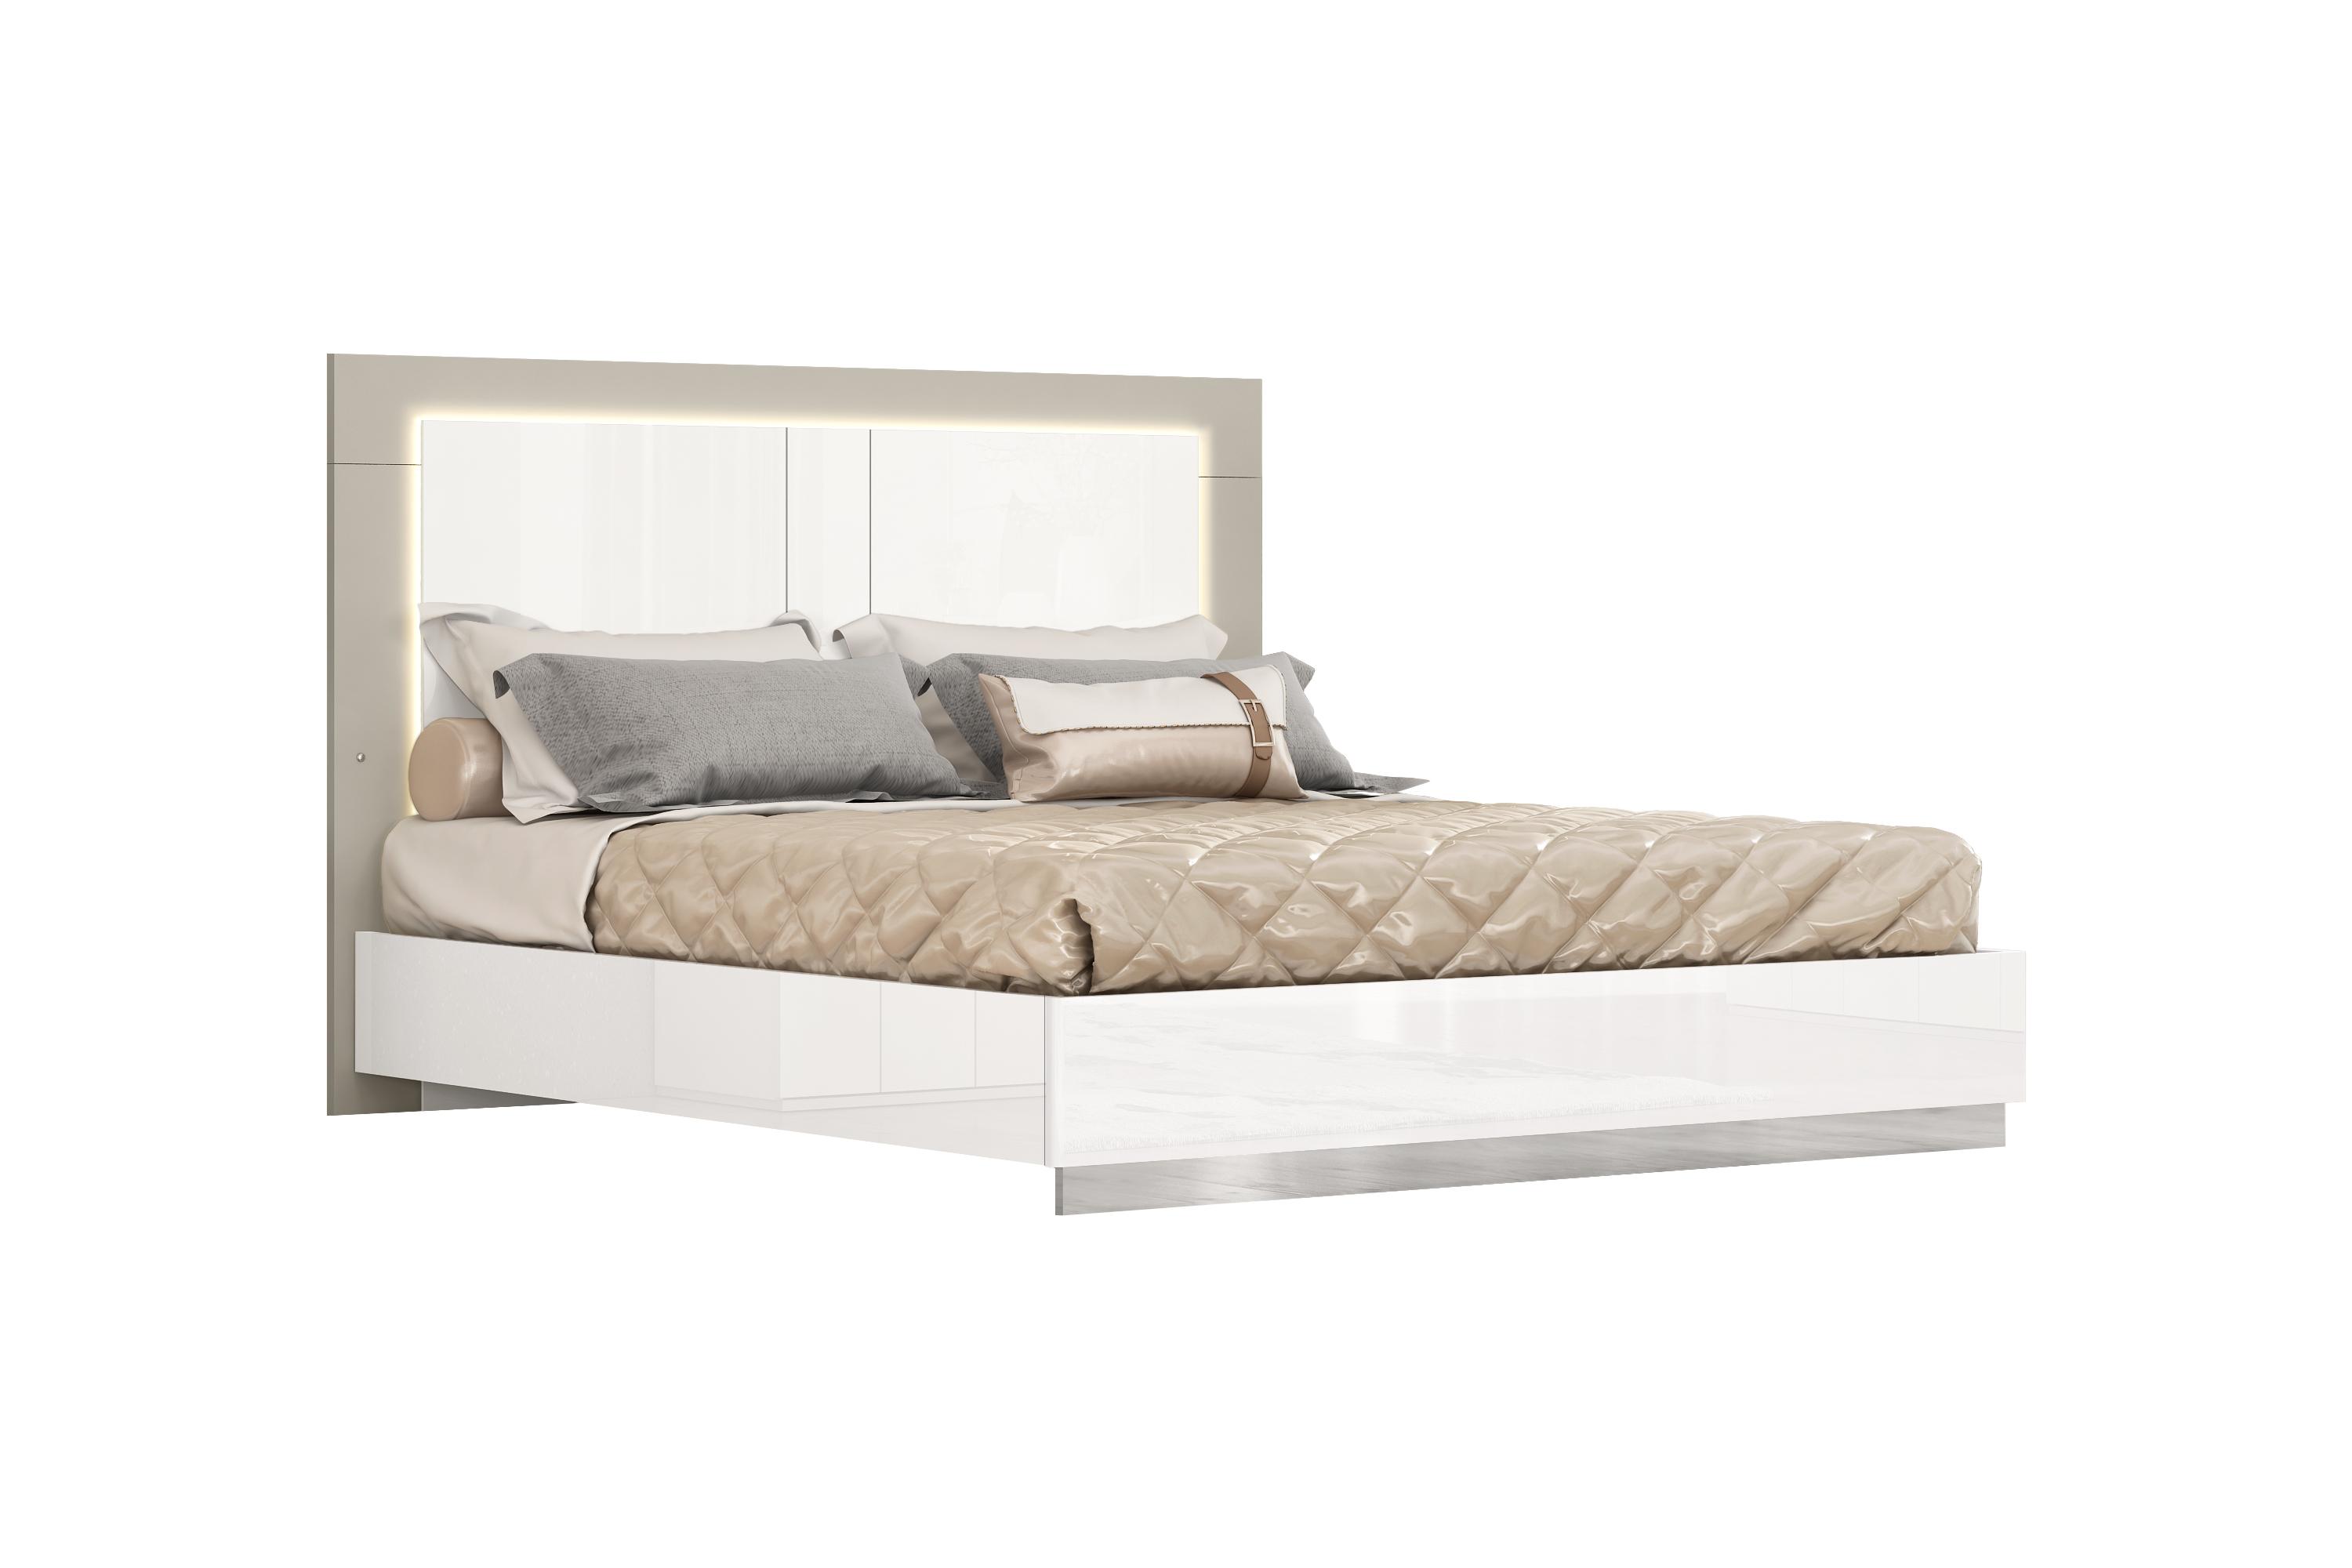 

    
Contemporary High Gloss White Solid Wood Queen Bed WhiteLine BQ1723-WHT Daisy
